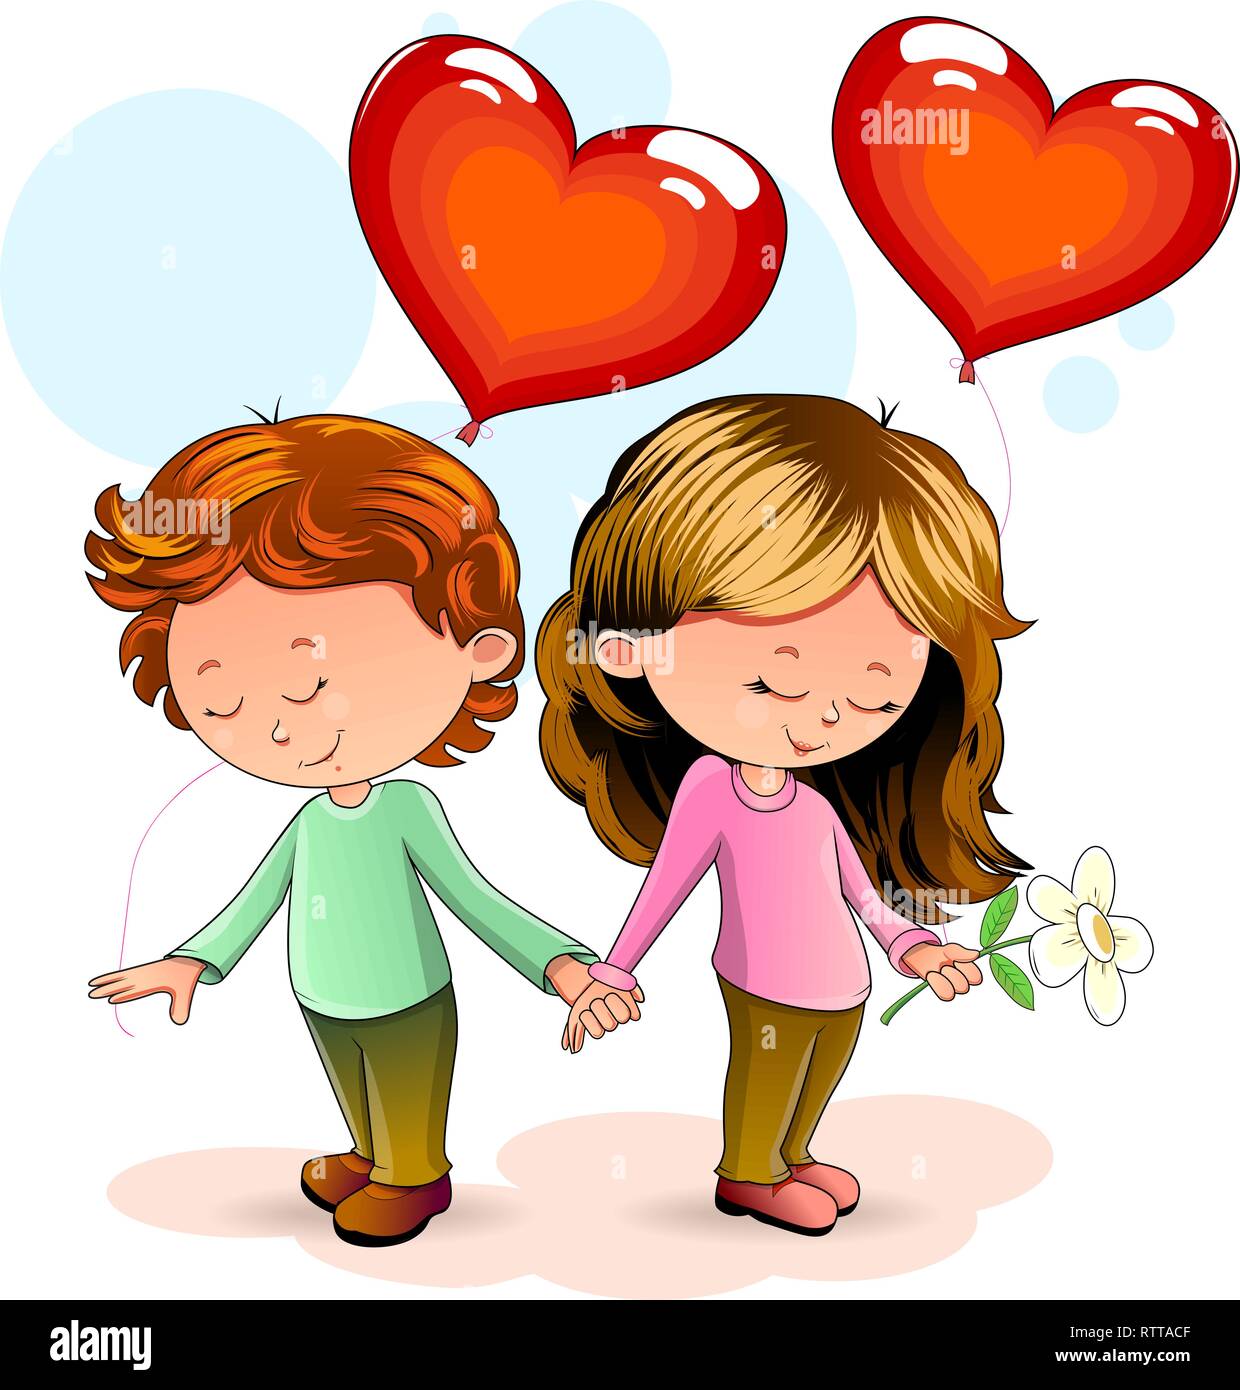 Girl and boy standing together and holding hands. Boy and girl with heart-shaped balloons. Stock Vector